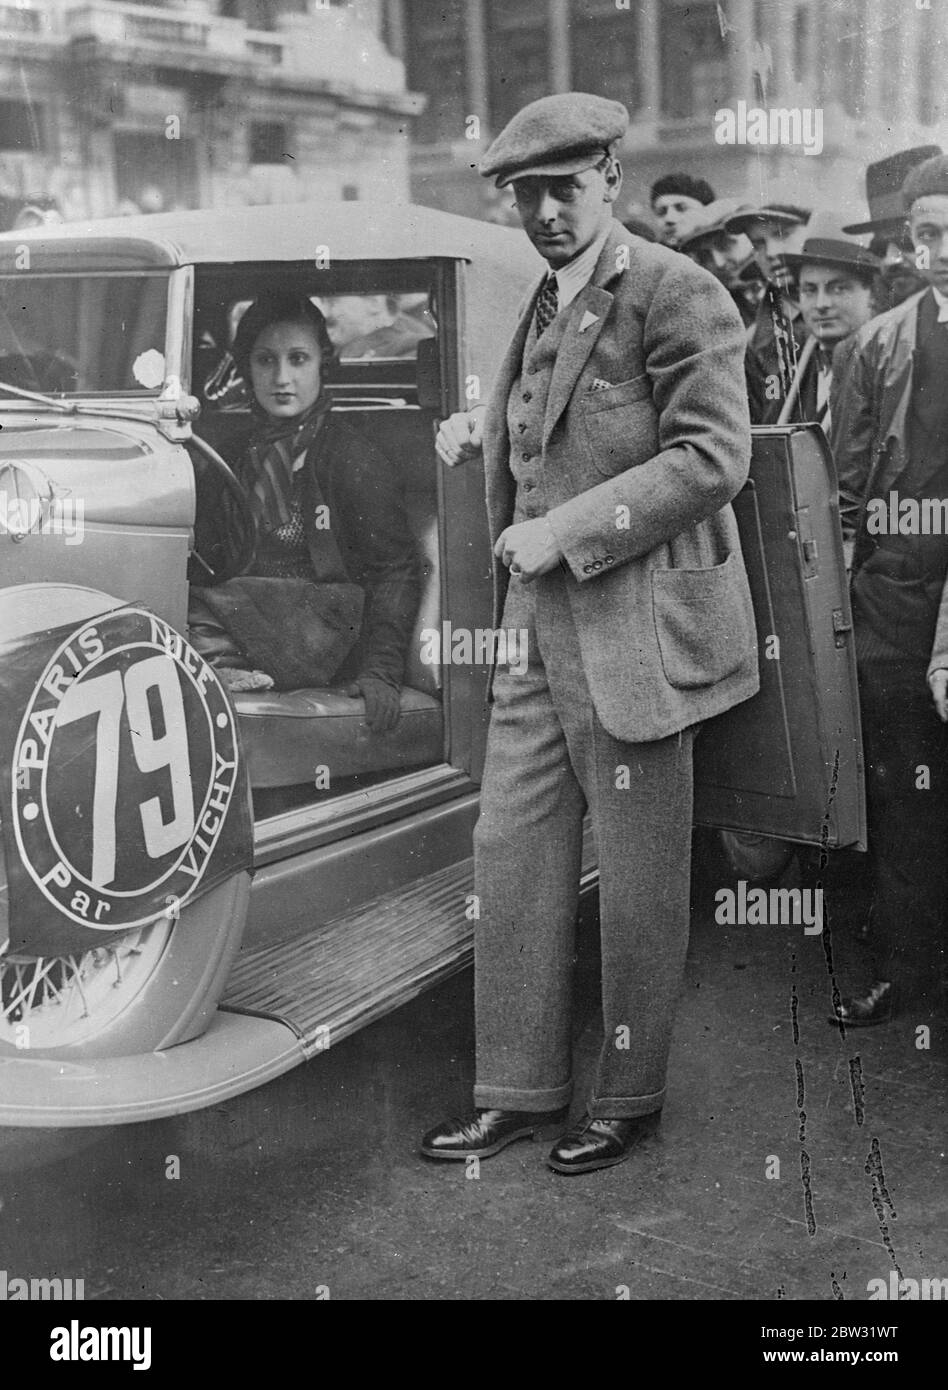 Prince Nicholas of Romania and bride compete in Paris to Nice motor race . Unusual interest was lent to the eleventh annual Paris to Nice automobile race via Vichy as Prince Nicholas of Romania and his bride were among the competitors at the starting line . The whole world has been interested in the love romance of Prince Nicholas and his bride , who was formerly the wife of Romanian officer . King CArrol banned the marriage and Prince Nicholas and his bride are living in exile and have refused to return Romania until the marriage is recognised . Prince Nicholas and his bride justt before the Stock Photo